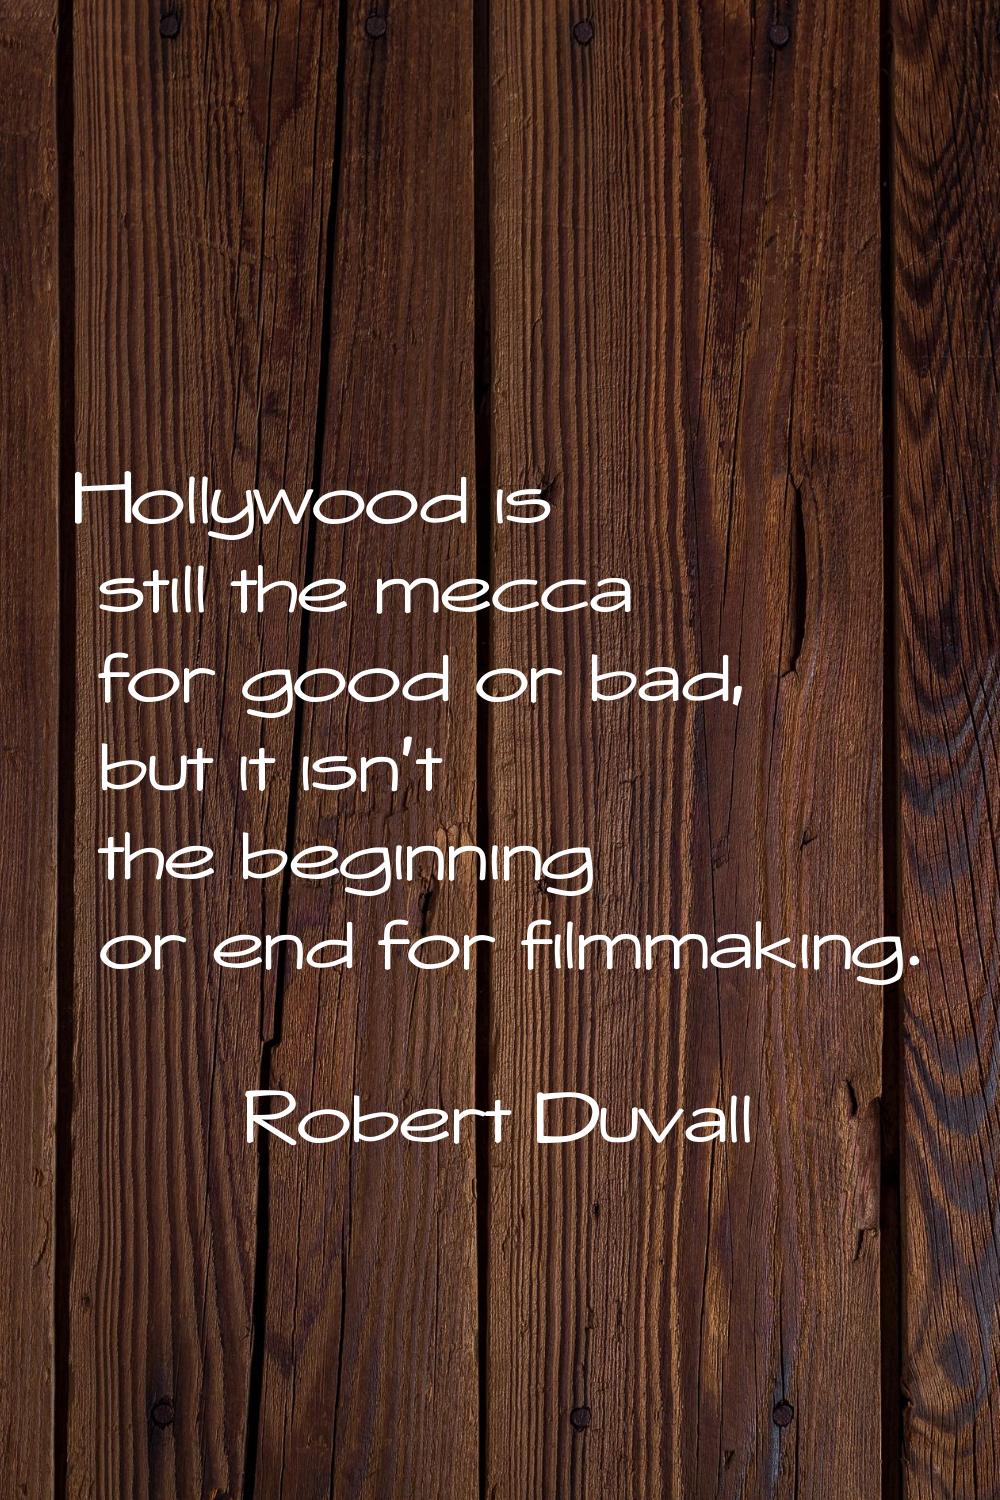 Hollywood is still the mecca for good or bad, but it isn't the beginning or end for filmmaking.